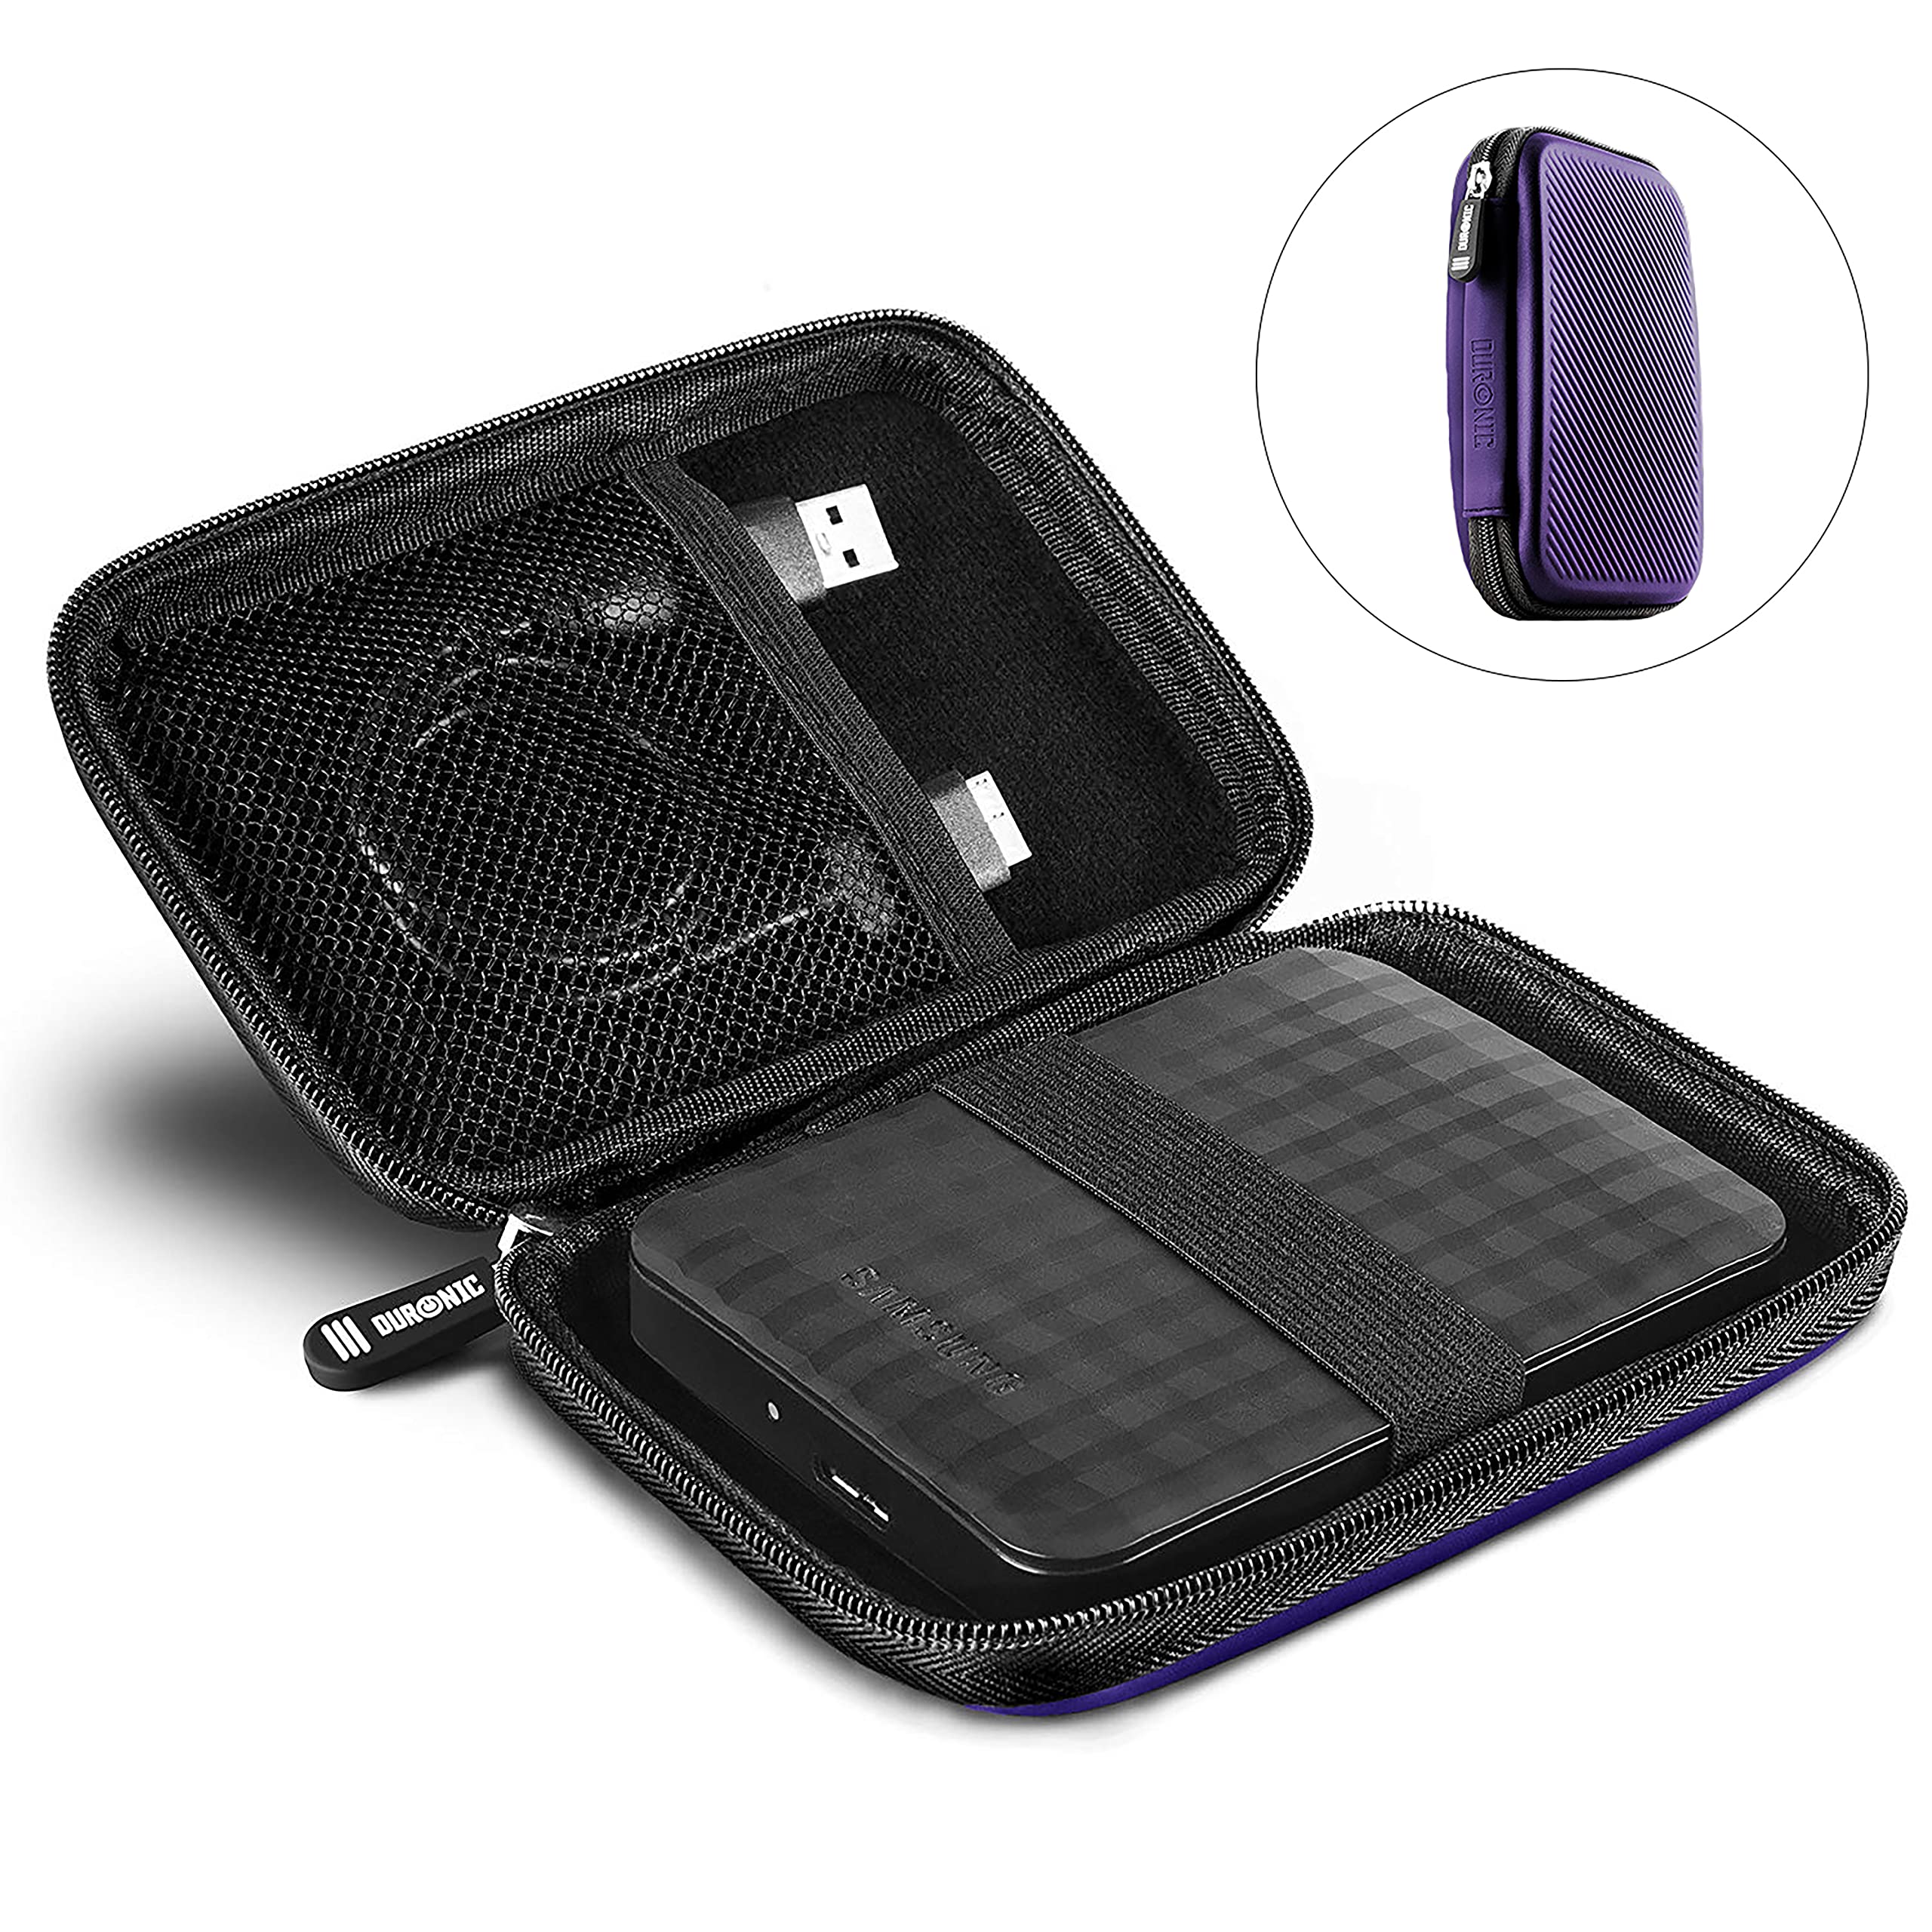 Duronic Hard Drive Case HDC2 /VT, VIOLET, Portable EVA Storage Pouch for External Hardrive & Cables, Lightweight & Protective, Suitable for WE/Western, Toshiba, Buffalo, Hitachi, Seagate, Samsung